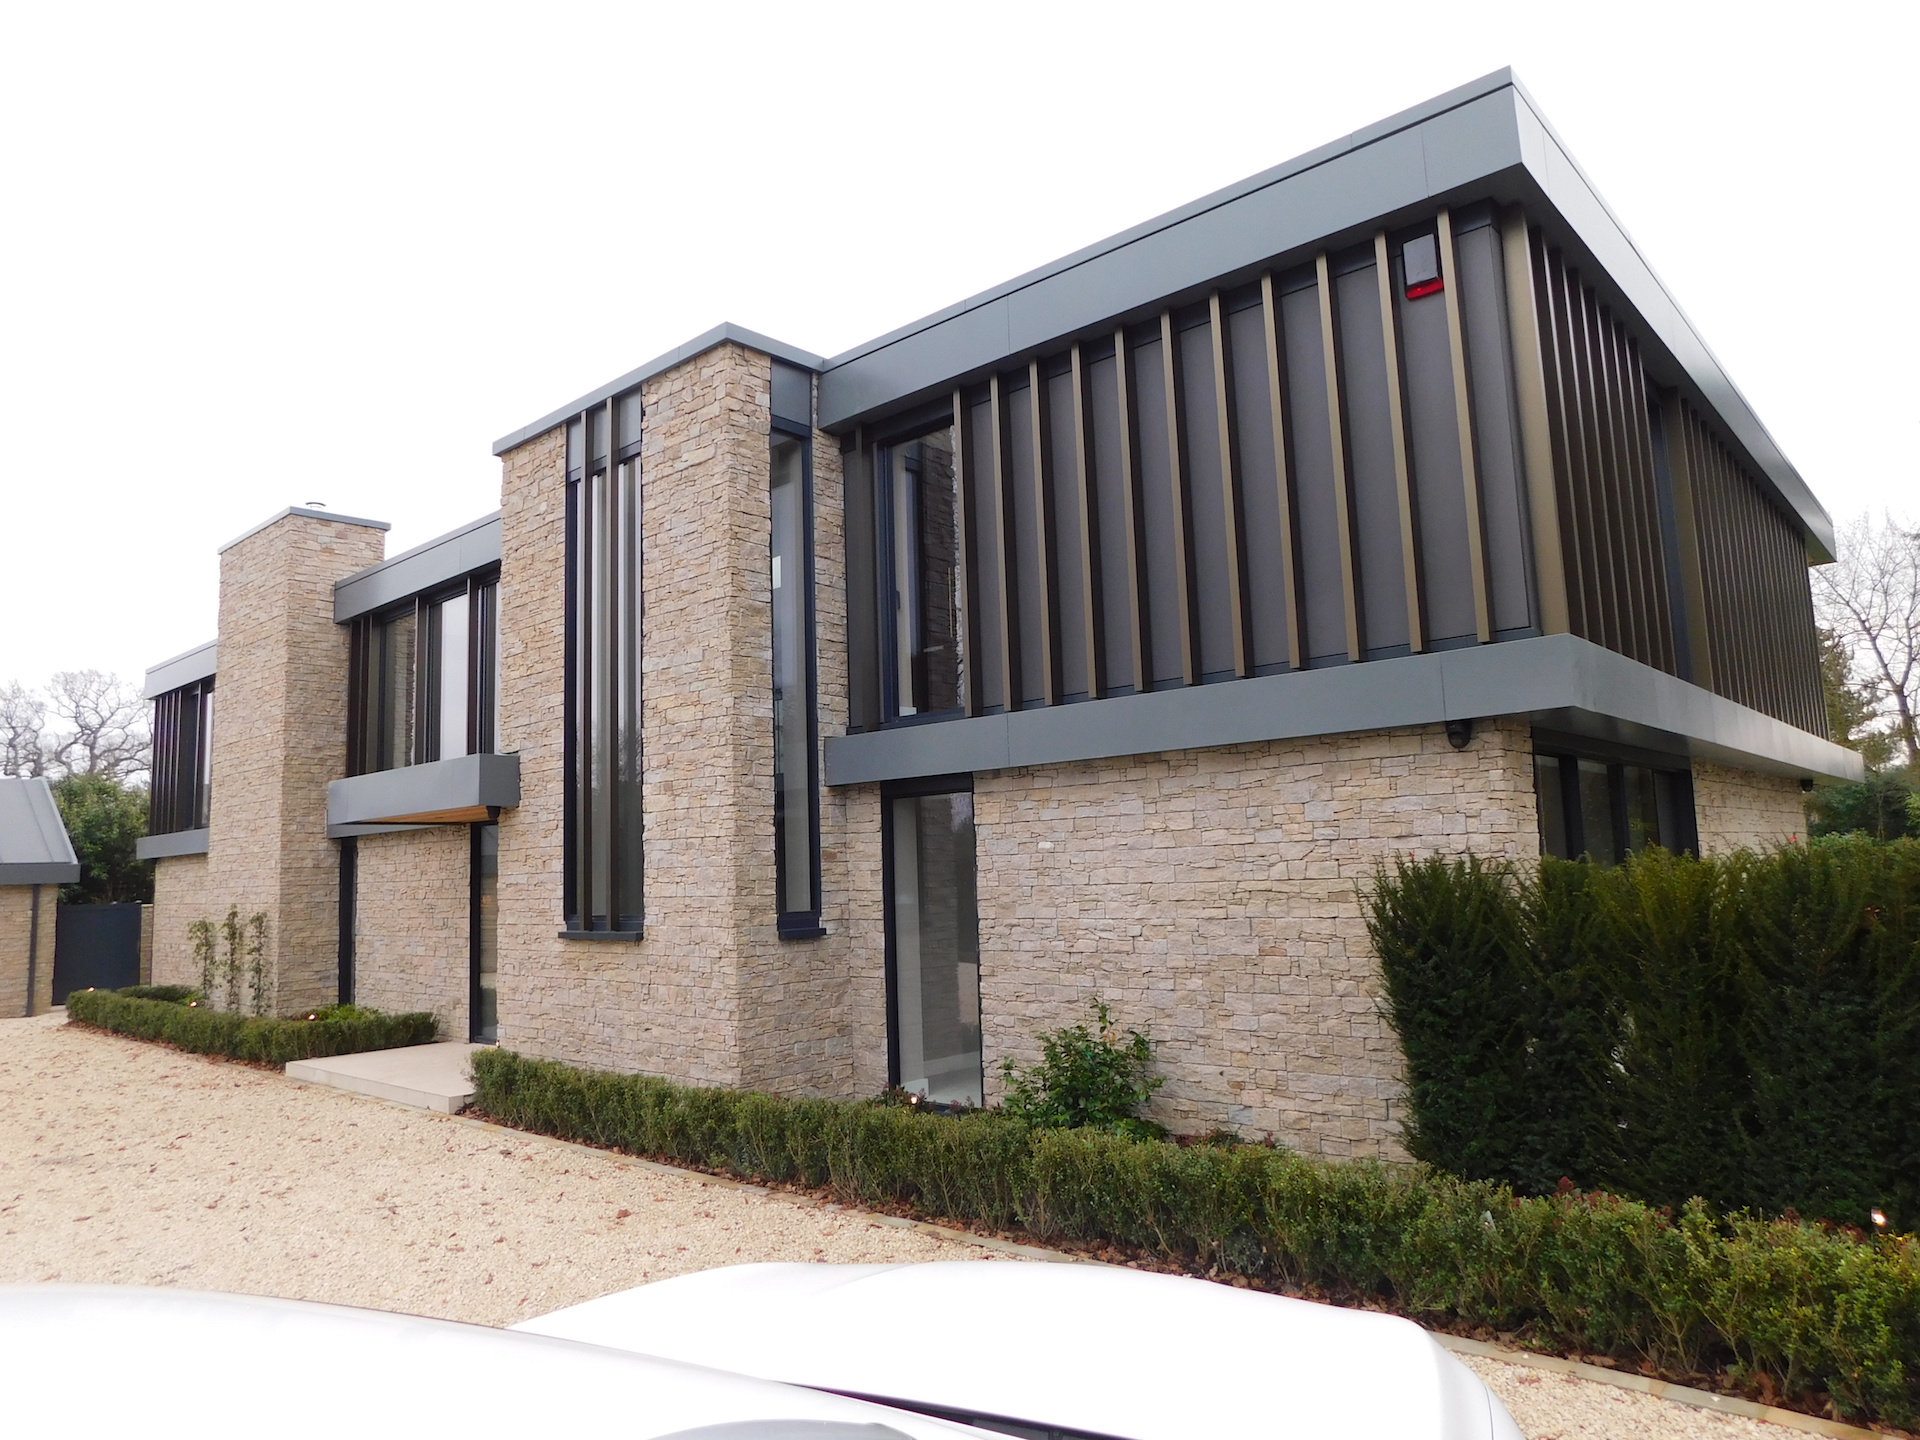 Private dwelling in Cheshire -Equitone, Etex Natura secret fixed with feature aluminium architectural brise Soleil img 2